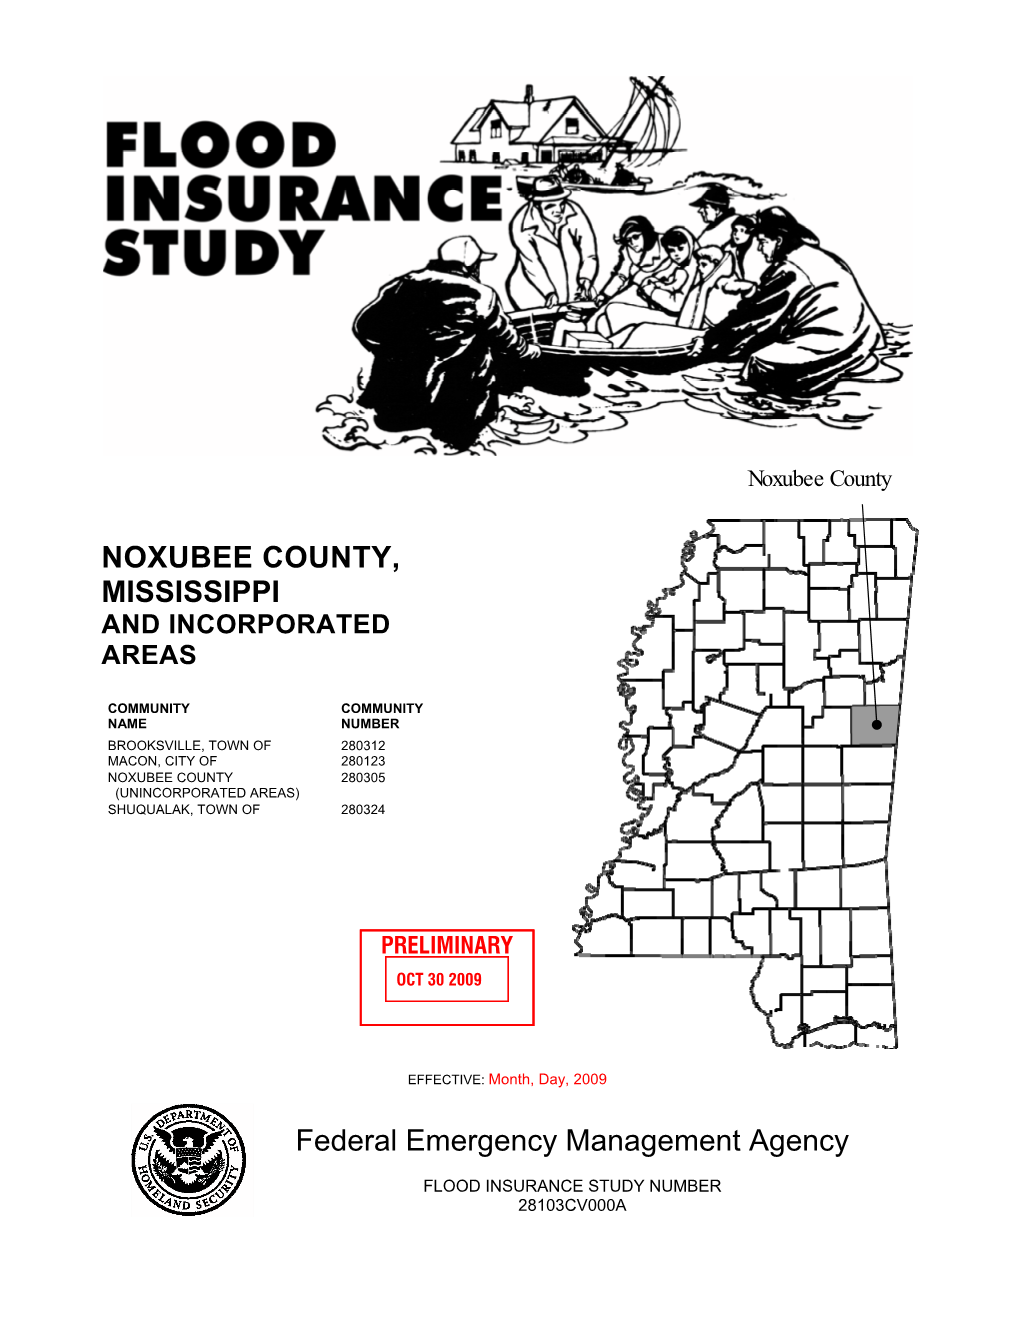 NOXUBEE COUNTY, MISSISSIPPI Federal Emergency Management